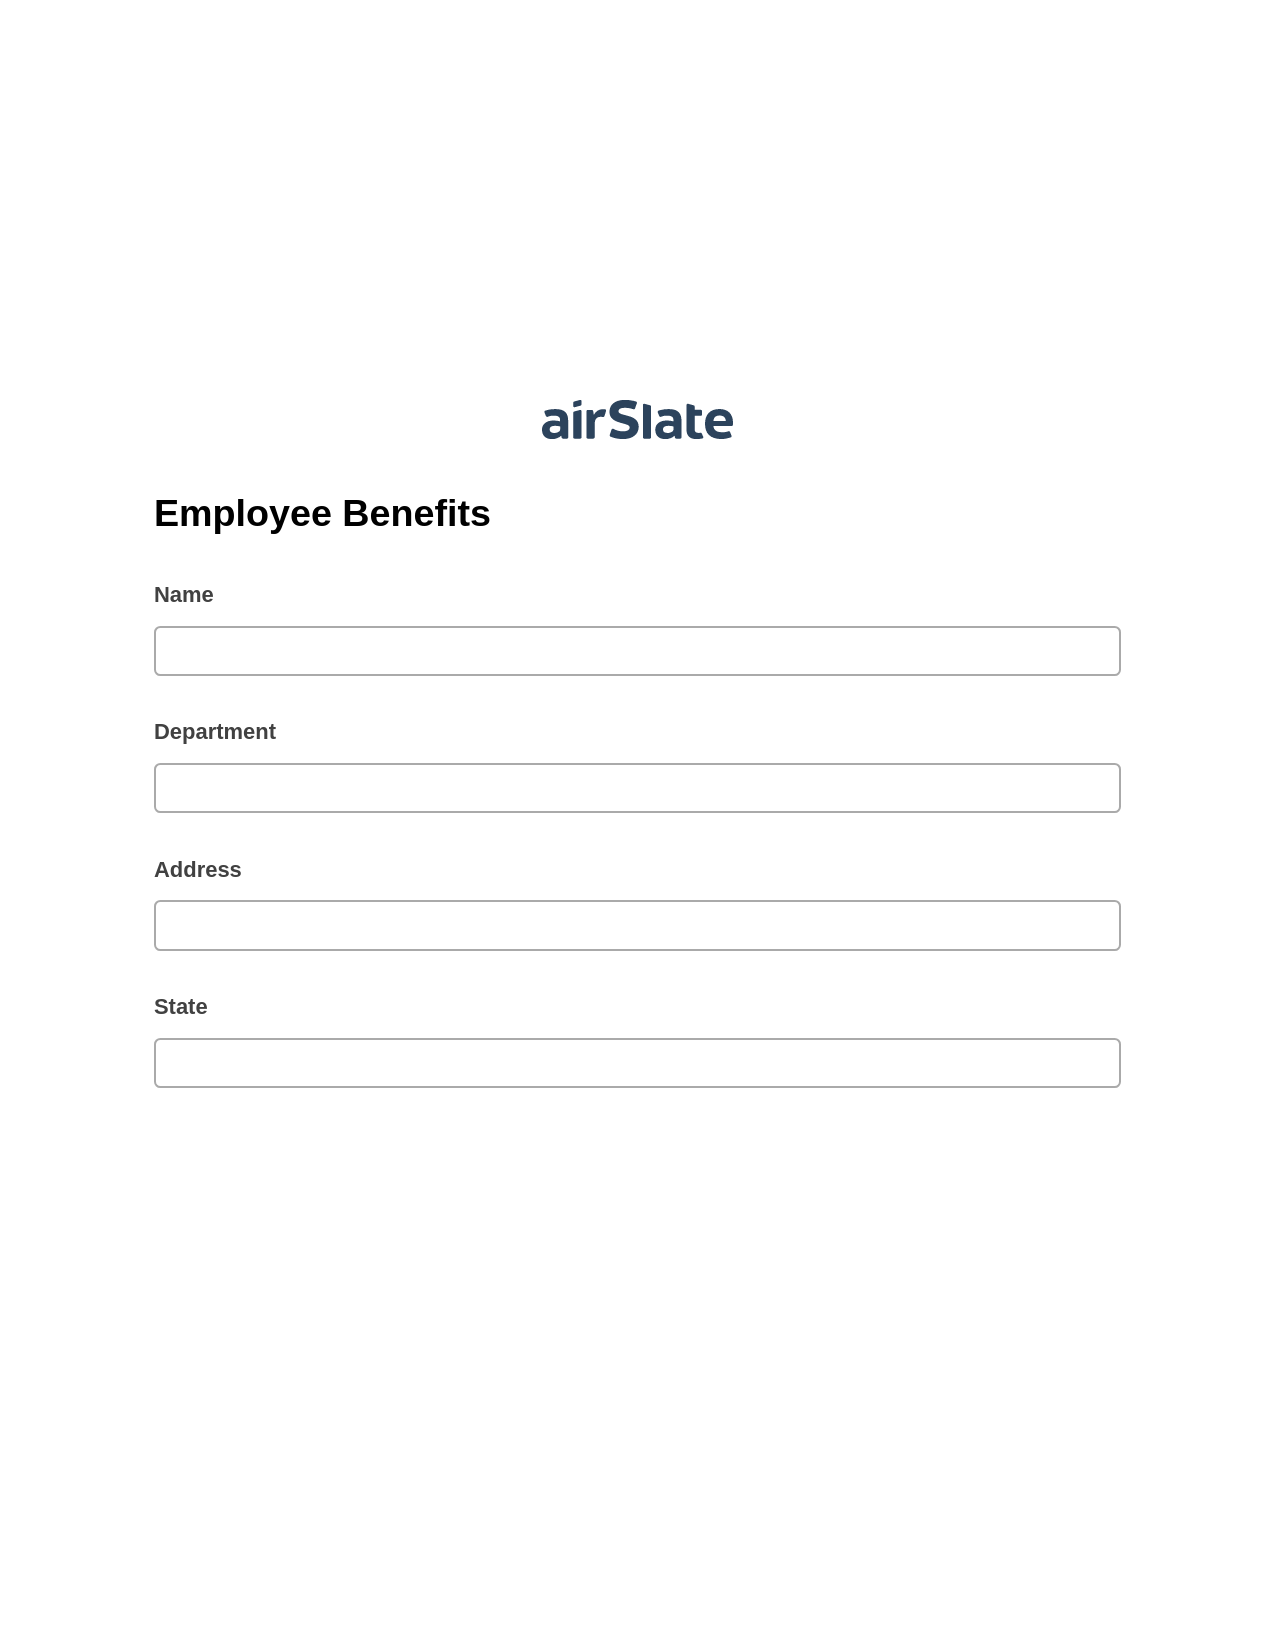 Employee Benefits Pre-fill Slate from MS Dynamics 365 Records Bot, Set Signature Type Bot, Export to Smartsheet